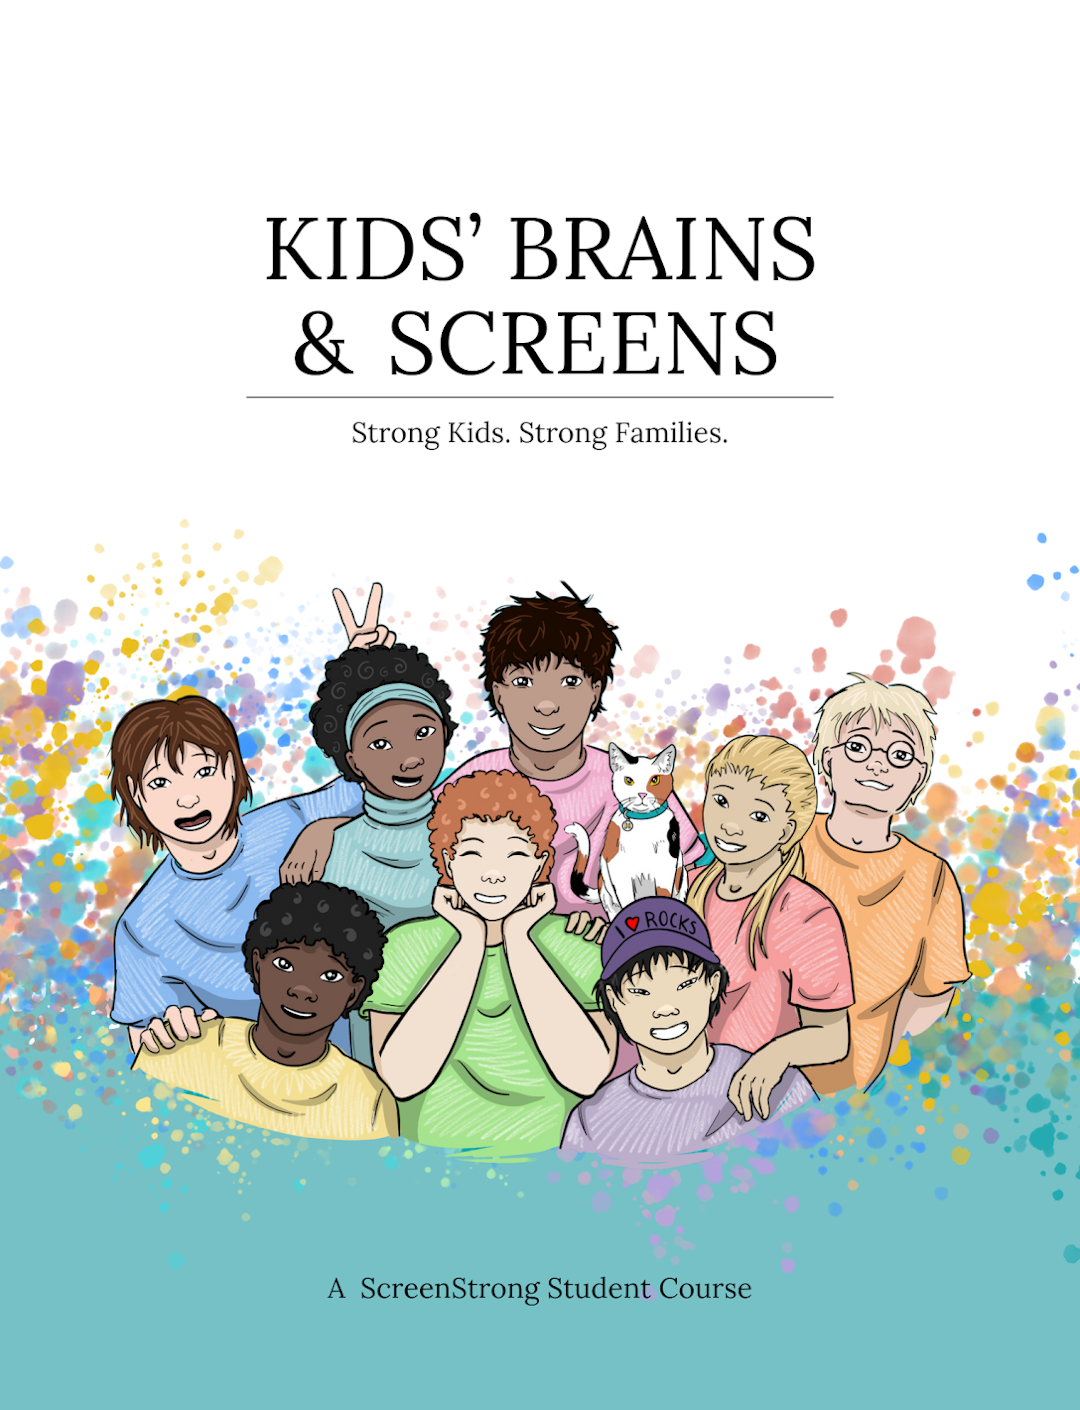 Kids' Brains & Screens: A ScreenStrong Student Course